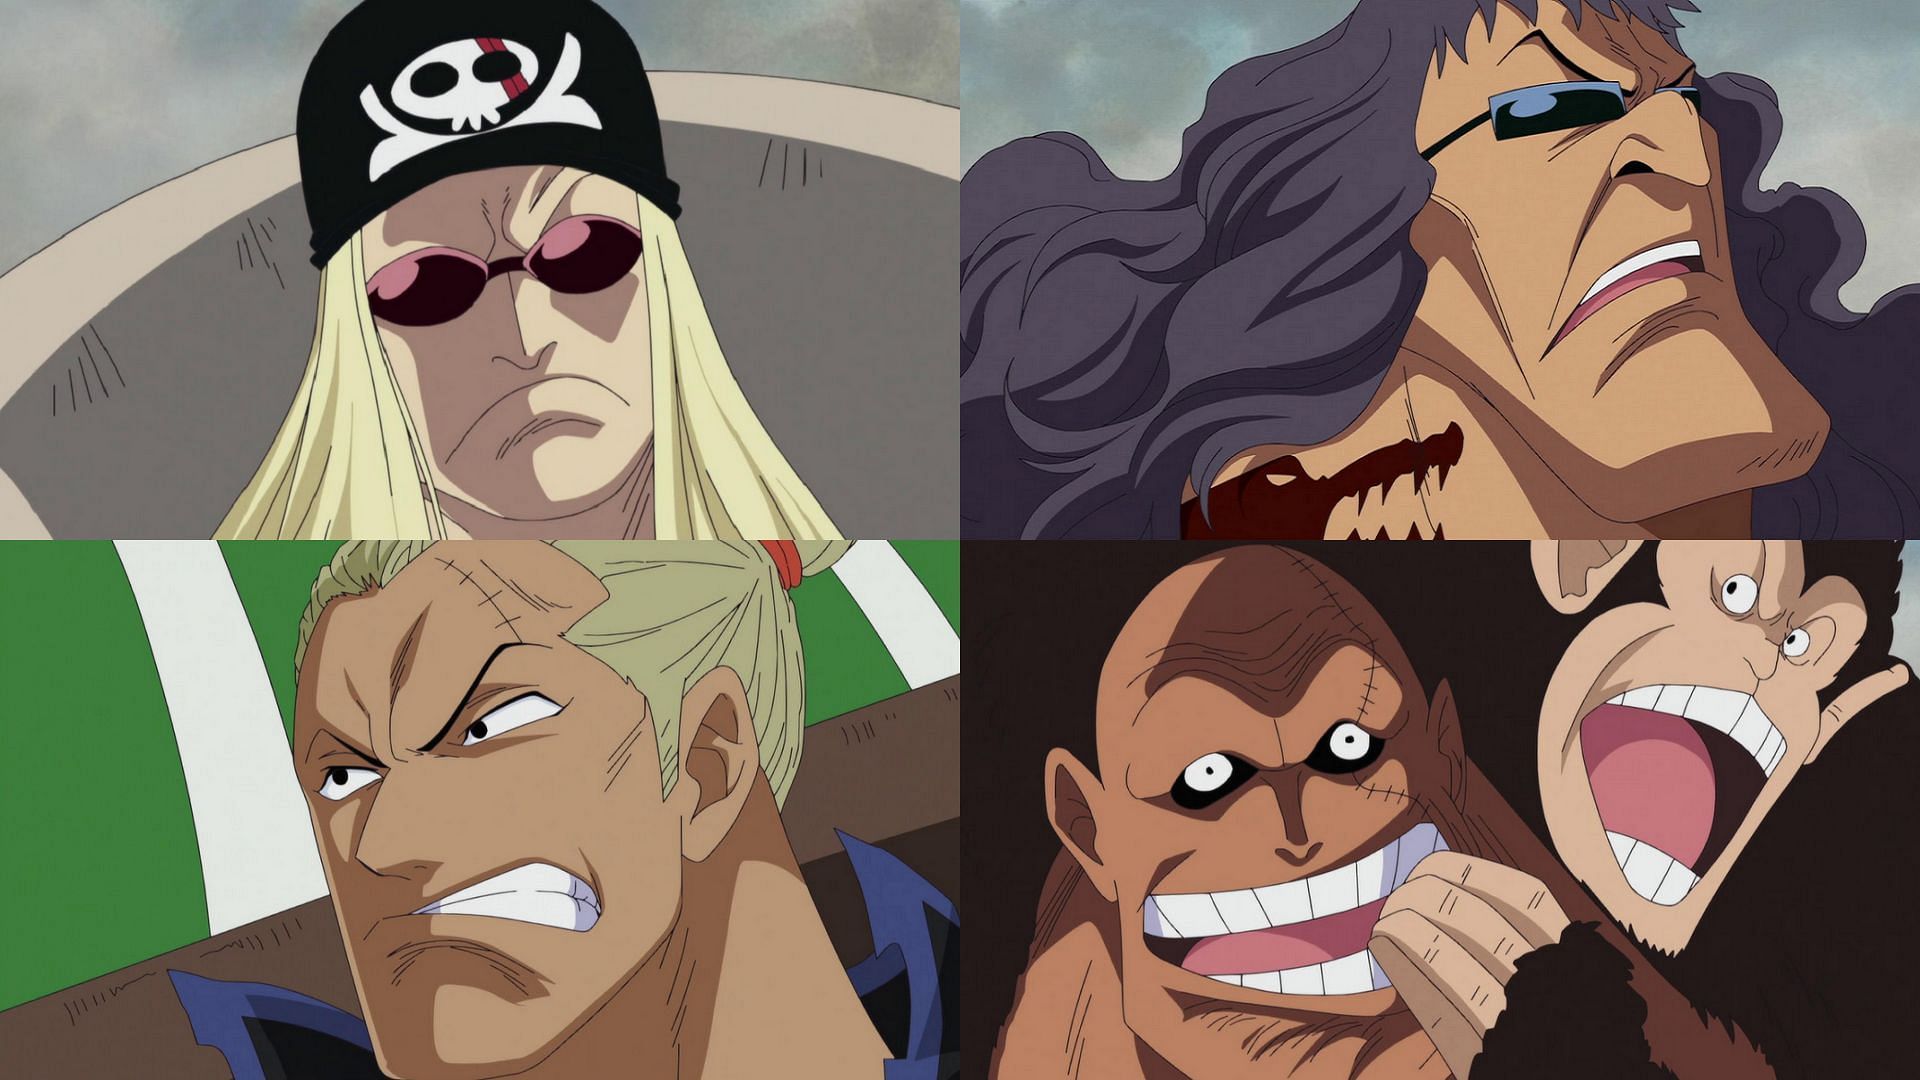 Limejuice, Building Snake, Hongo, Bonk Punch, and Monster as seen in One Piece (Image via Toei Animation, One Piece)